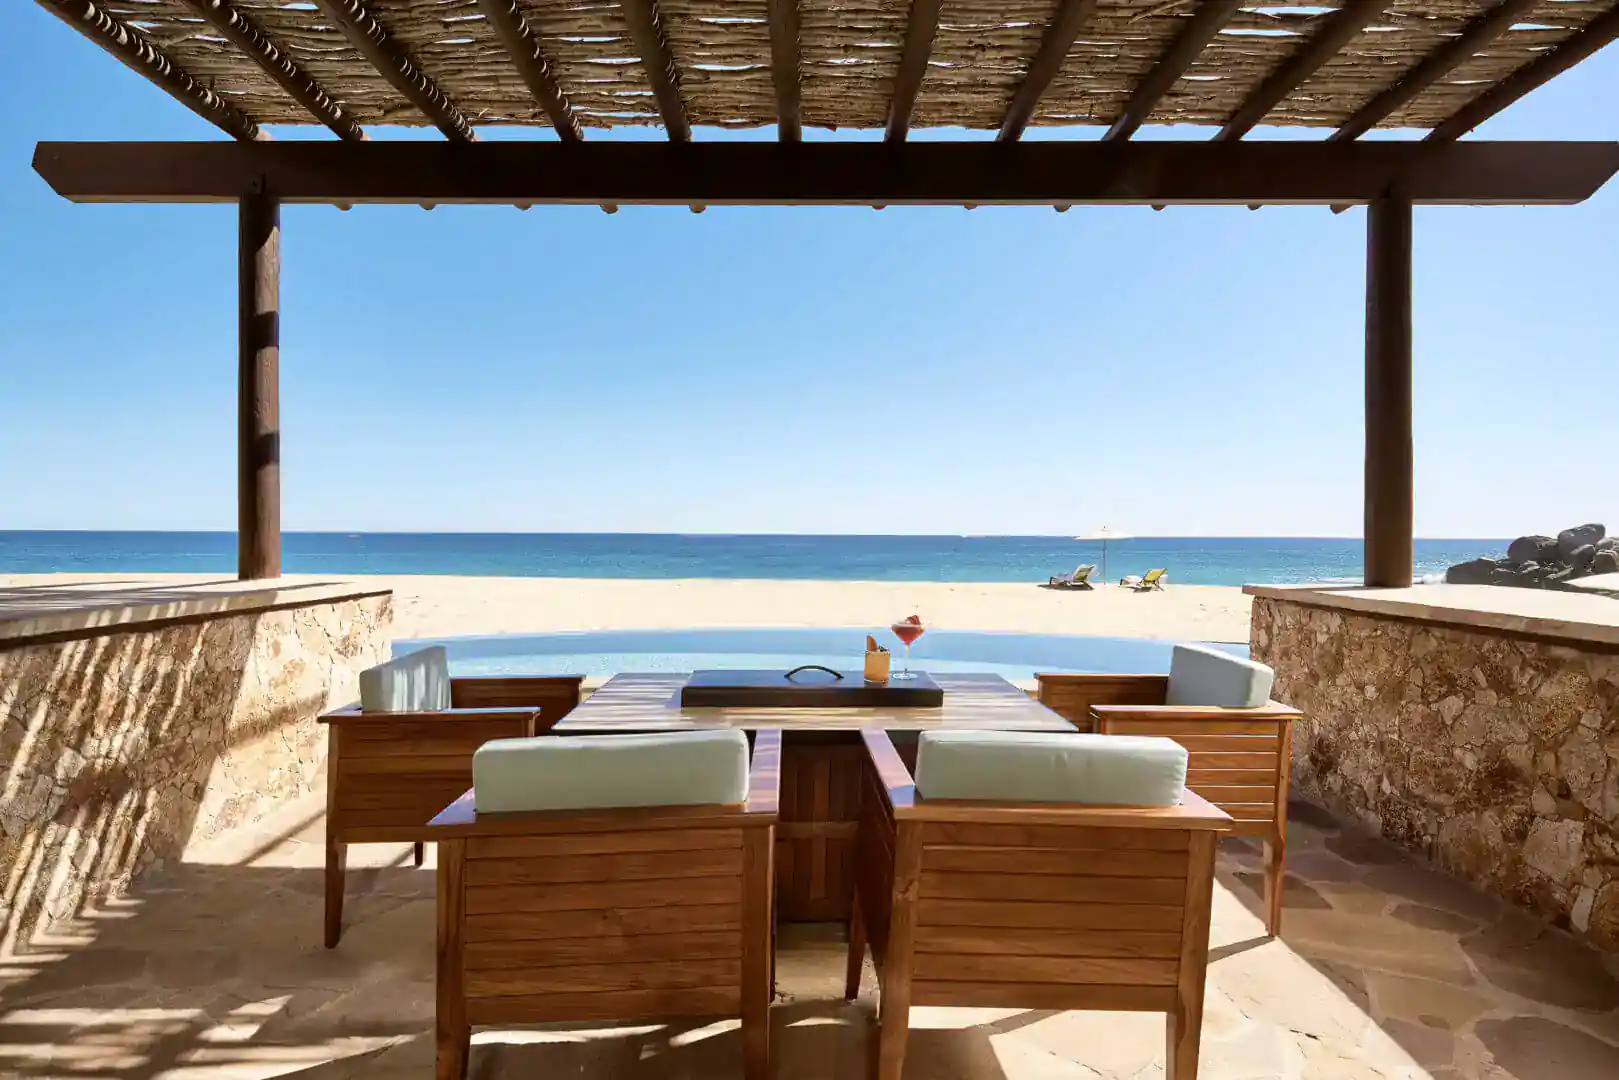 Two bedroom beeach front suite terrace plunge pool and beach the resort at pedregal e1635447430597